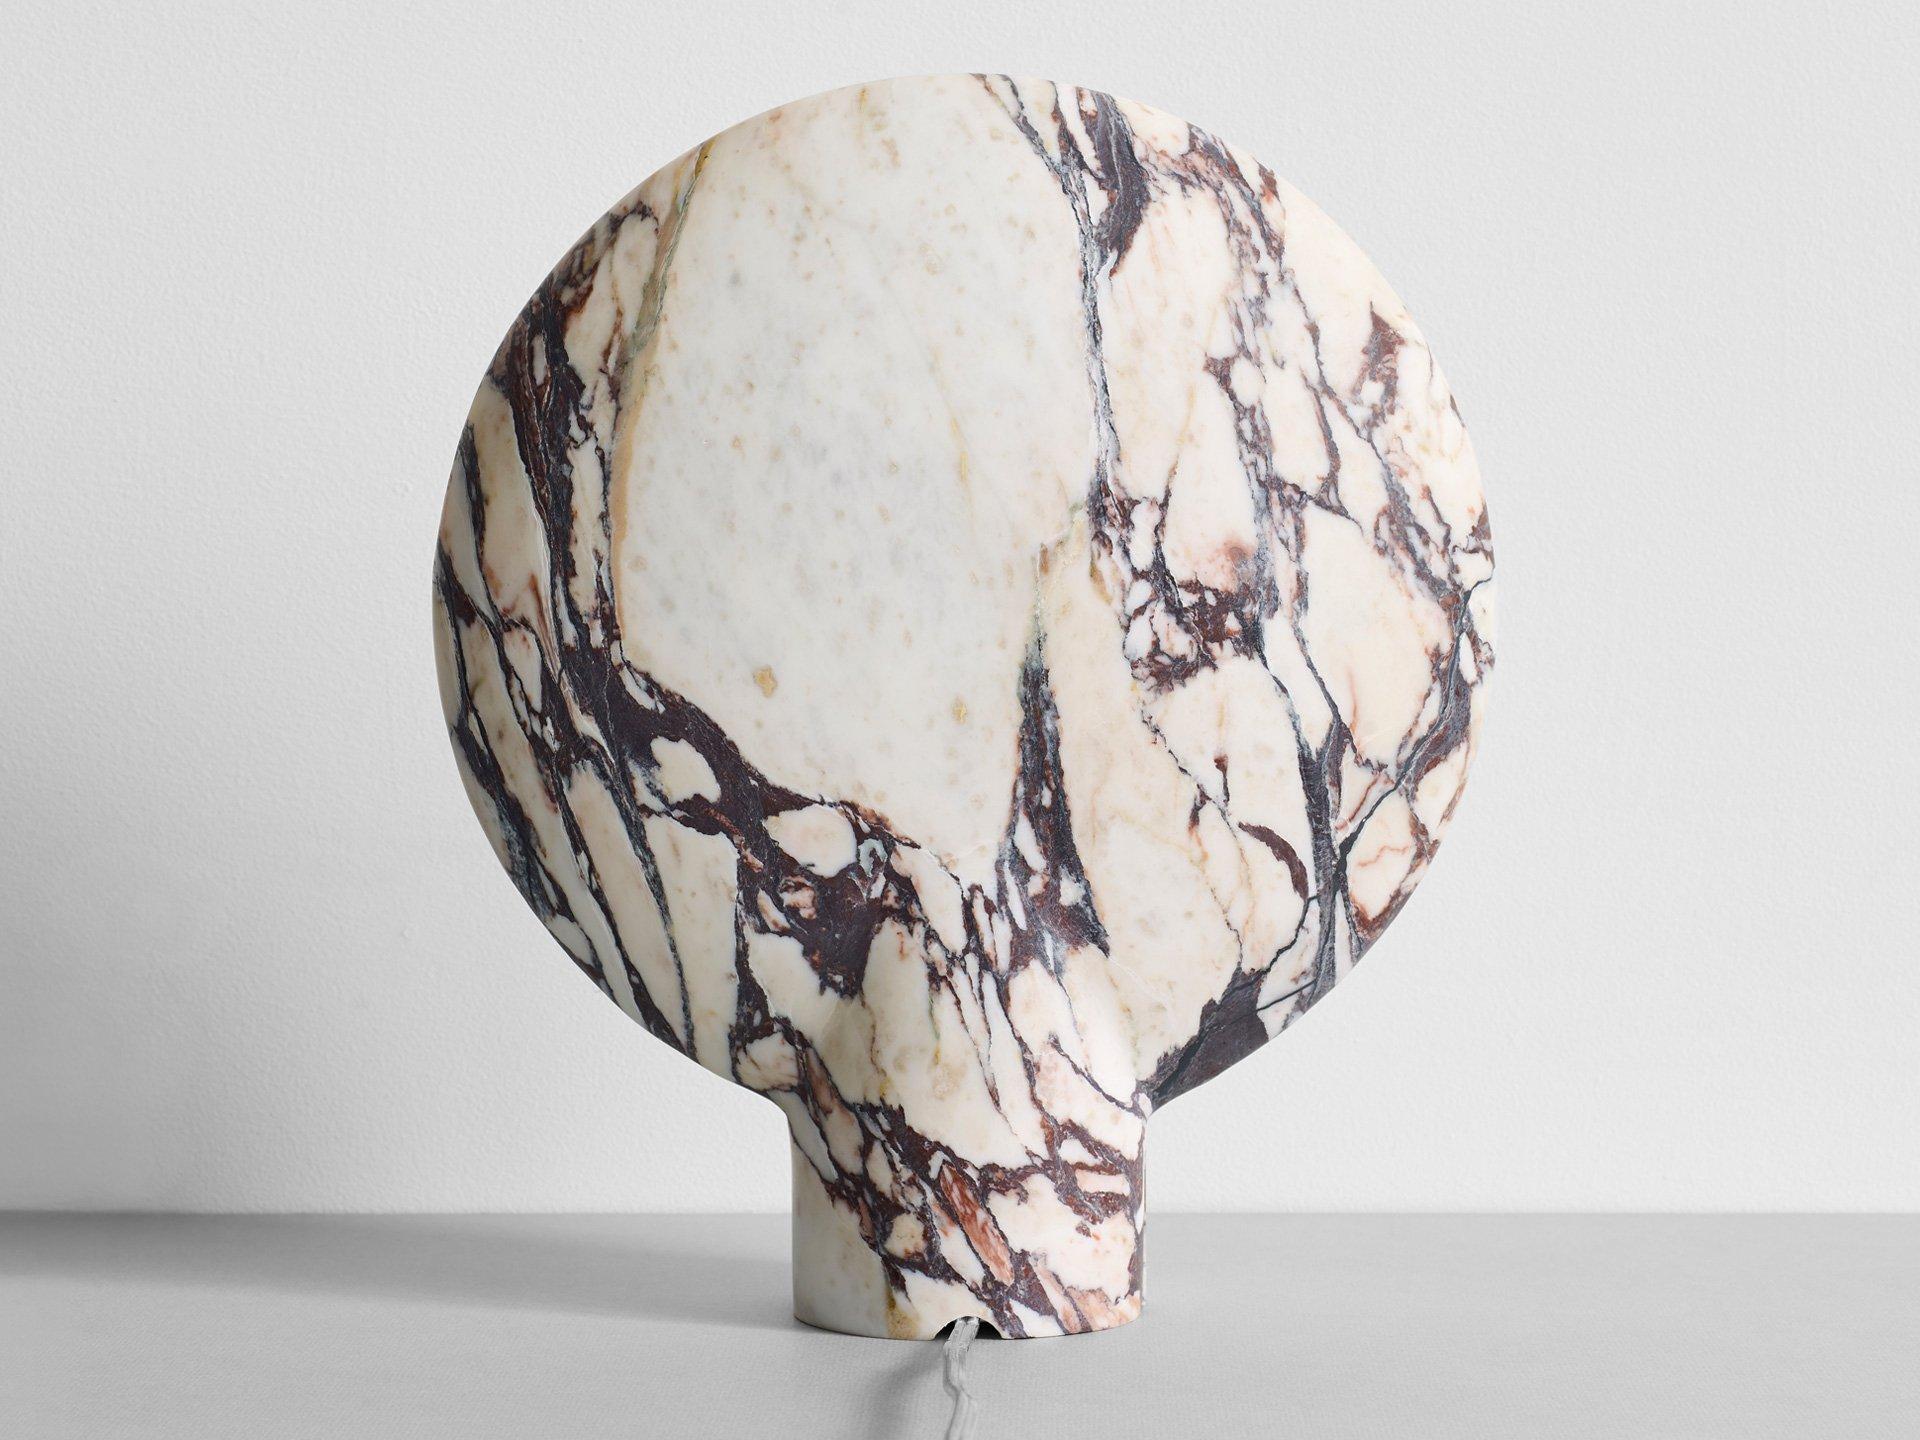 Calacatta Viola Surface Sconce by Henry Wilson
Dimensions: W 30 x D 11 x H 35 cm
Materials: Calacatta Viola Marble

This sculptural item is handmade in Sydney, Australia.

The lamp is an ambient, sculptural light carved in two halves from solid